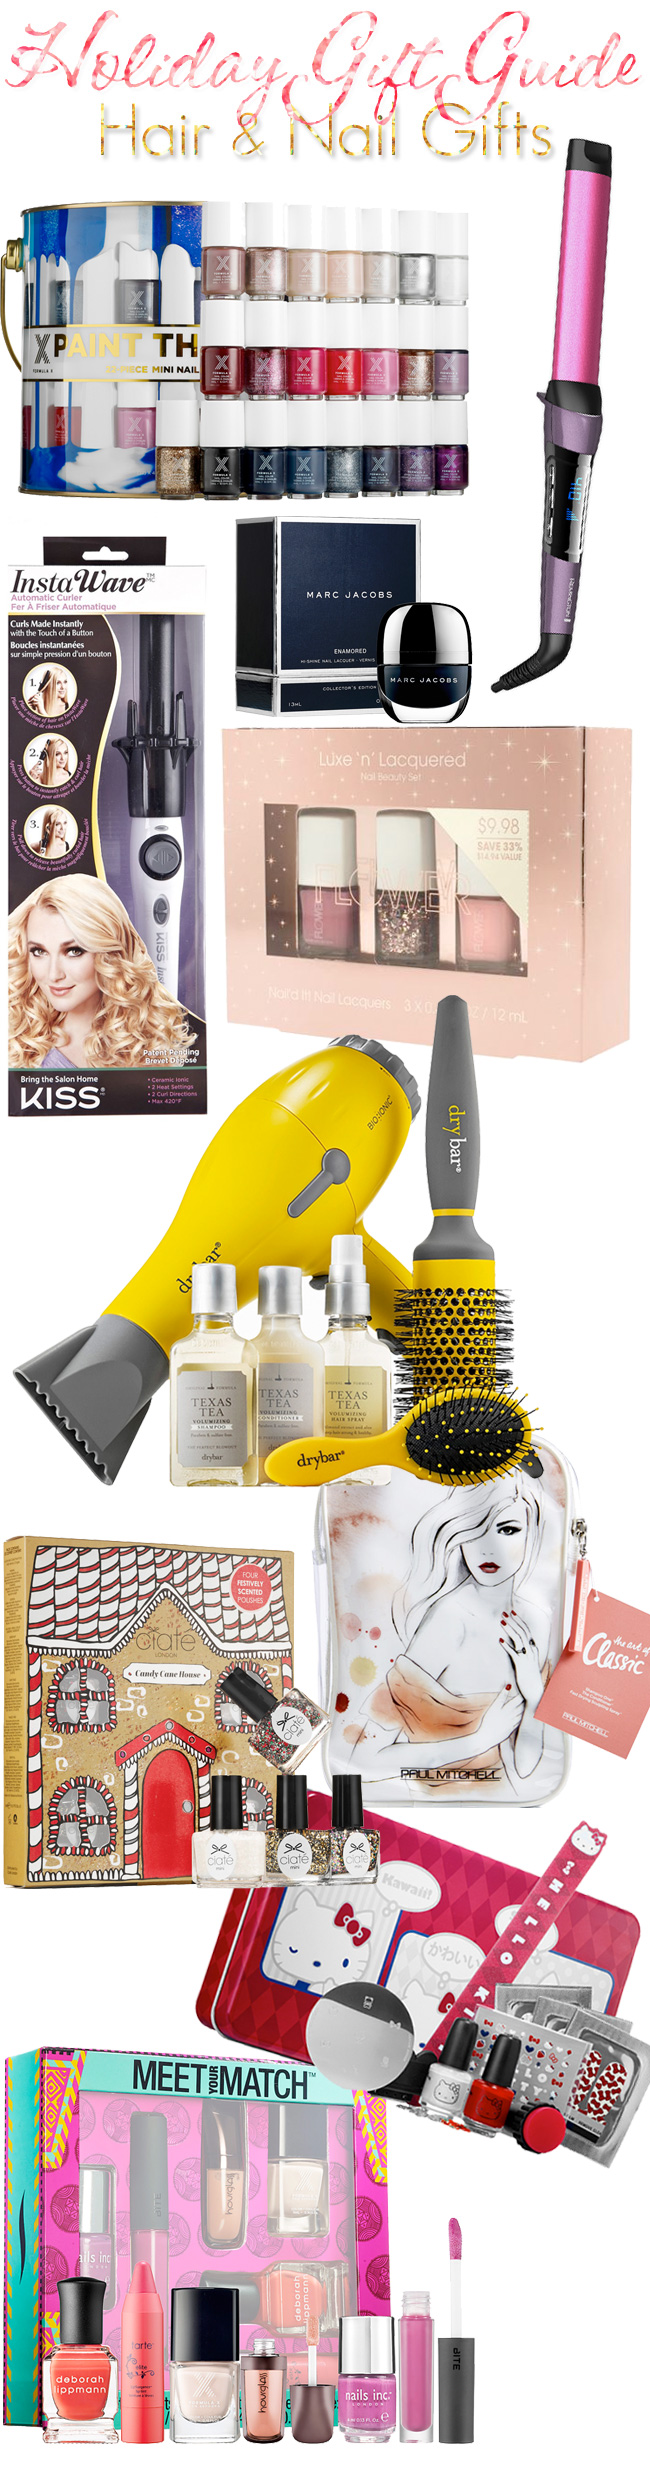 Holiday Gift Guide: The Best Hair & Nail Gifts